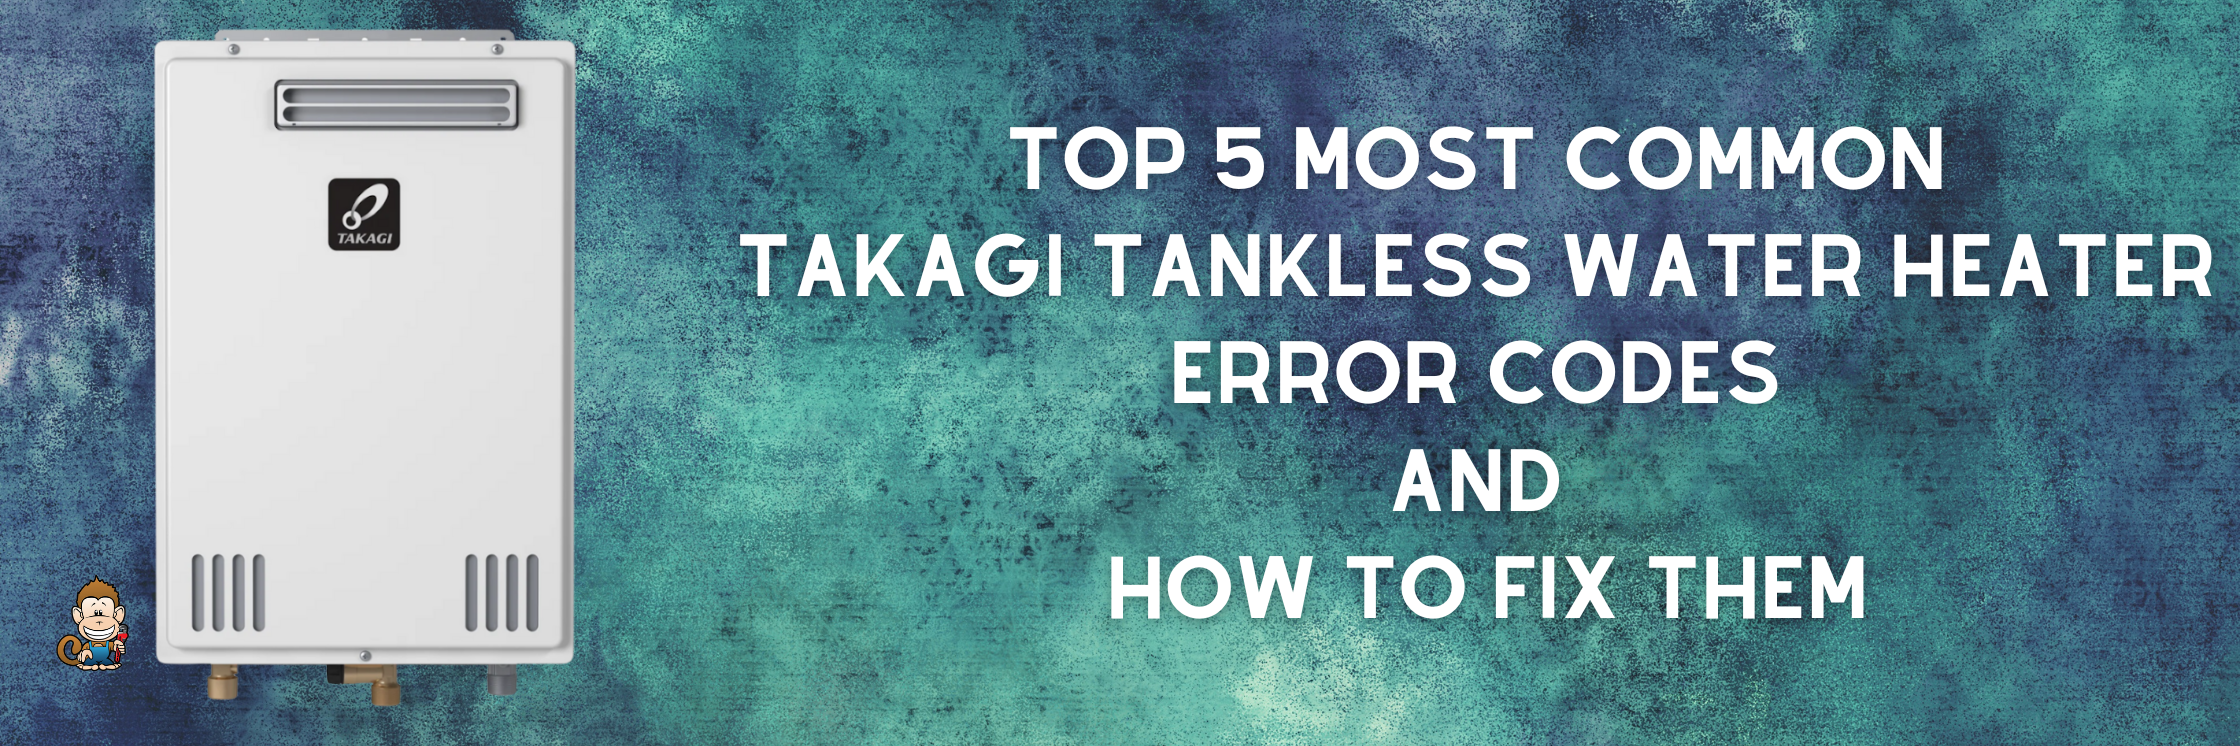 Top 5 Most Common Takagi Tankless Water Heater Error Codes and How to Fix Them